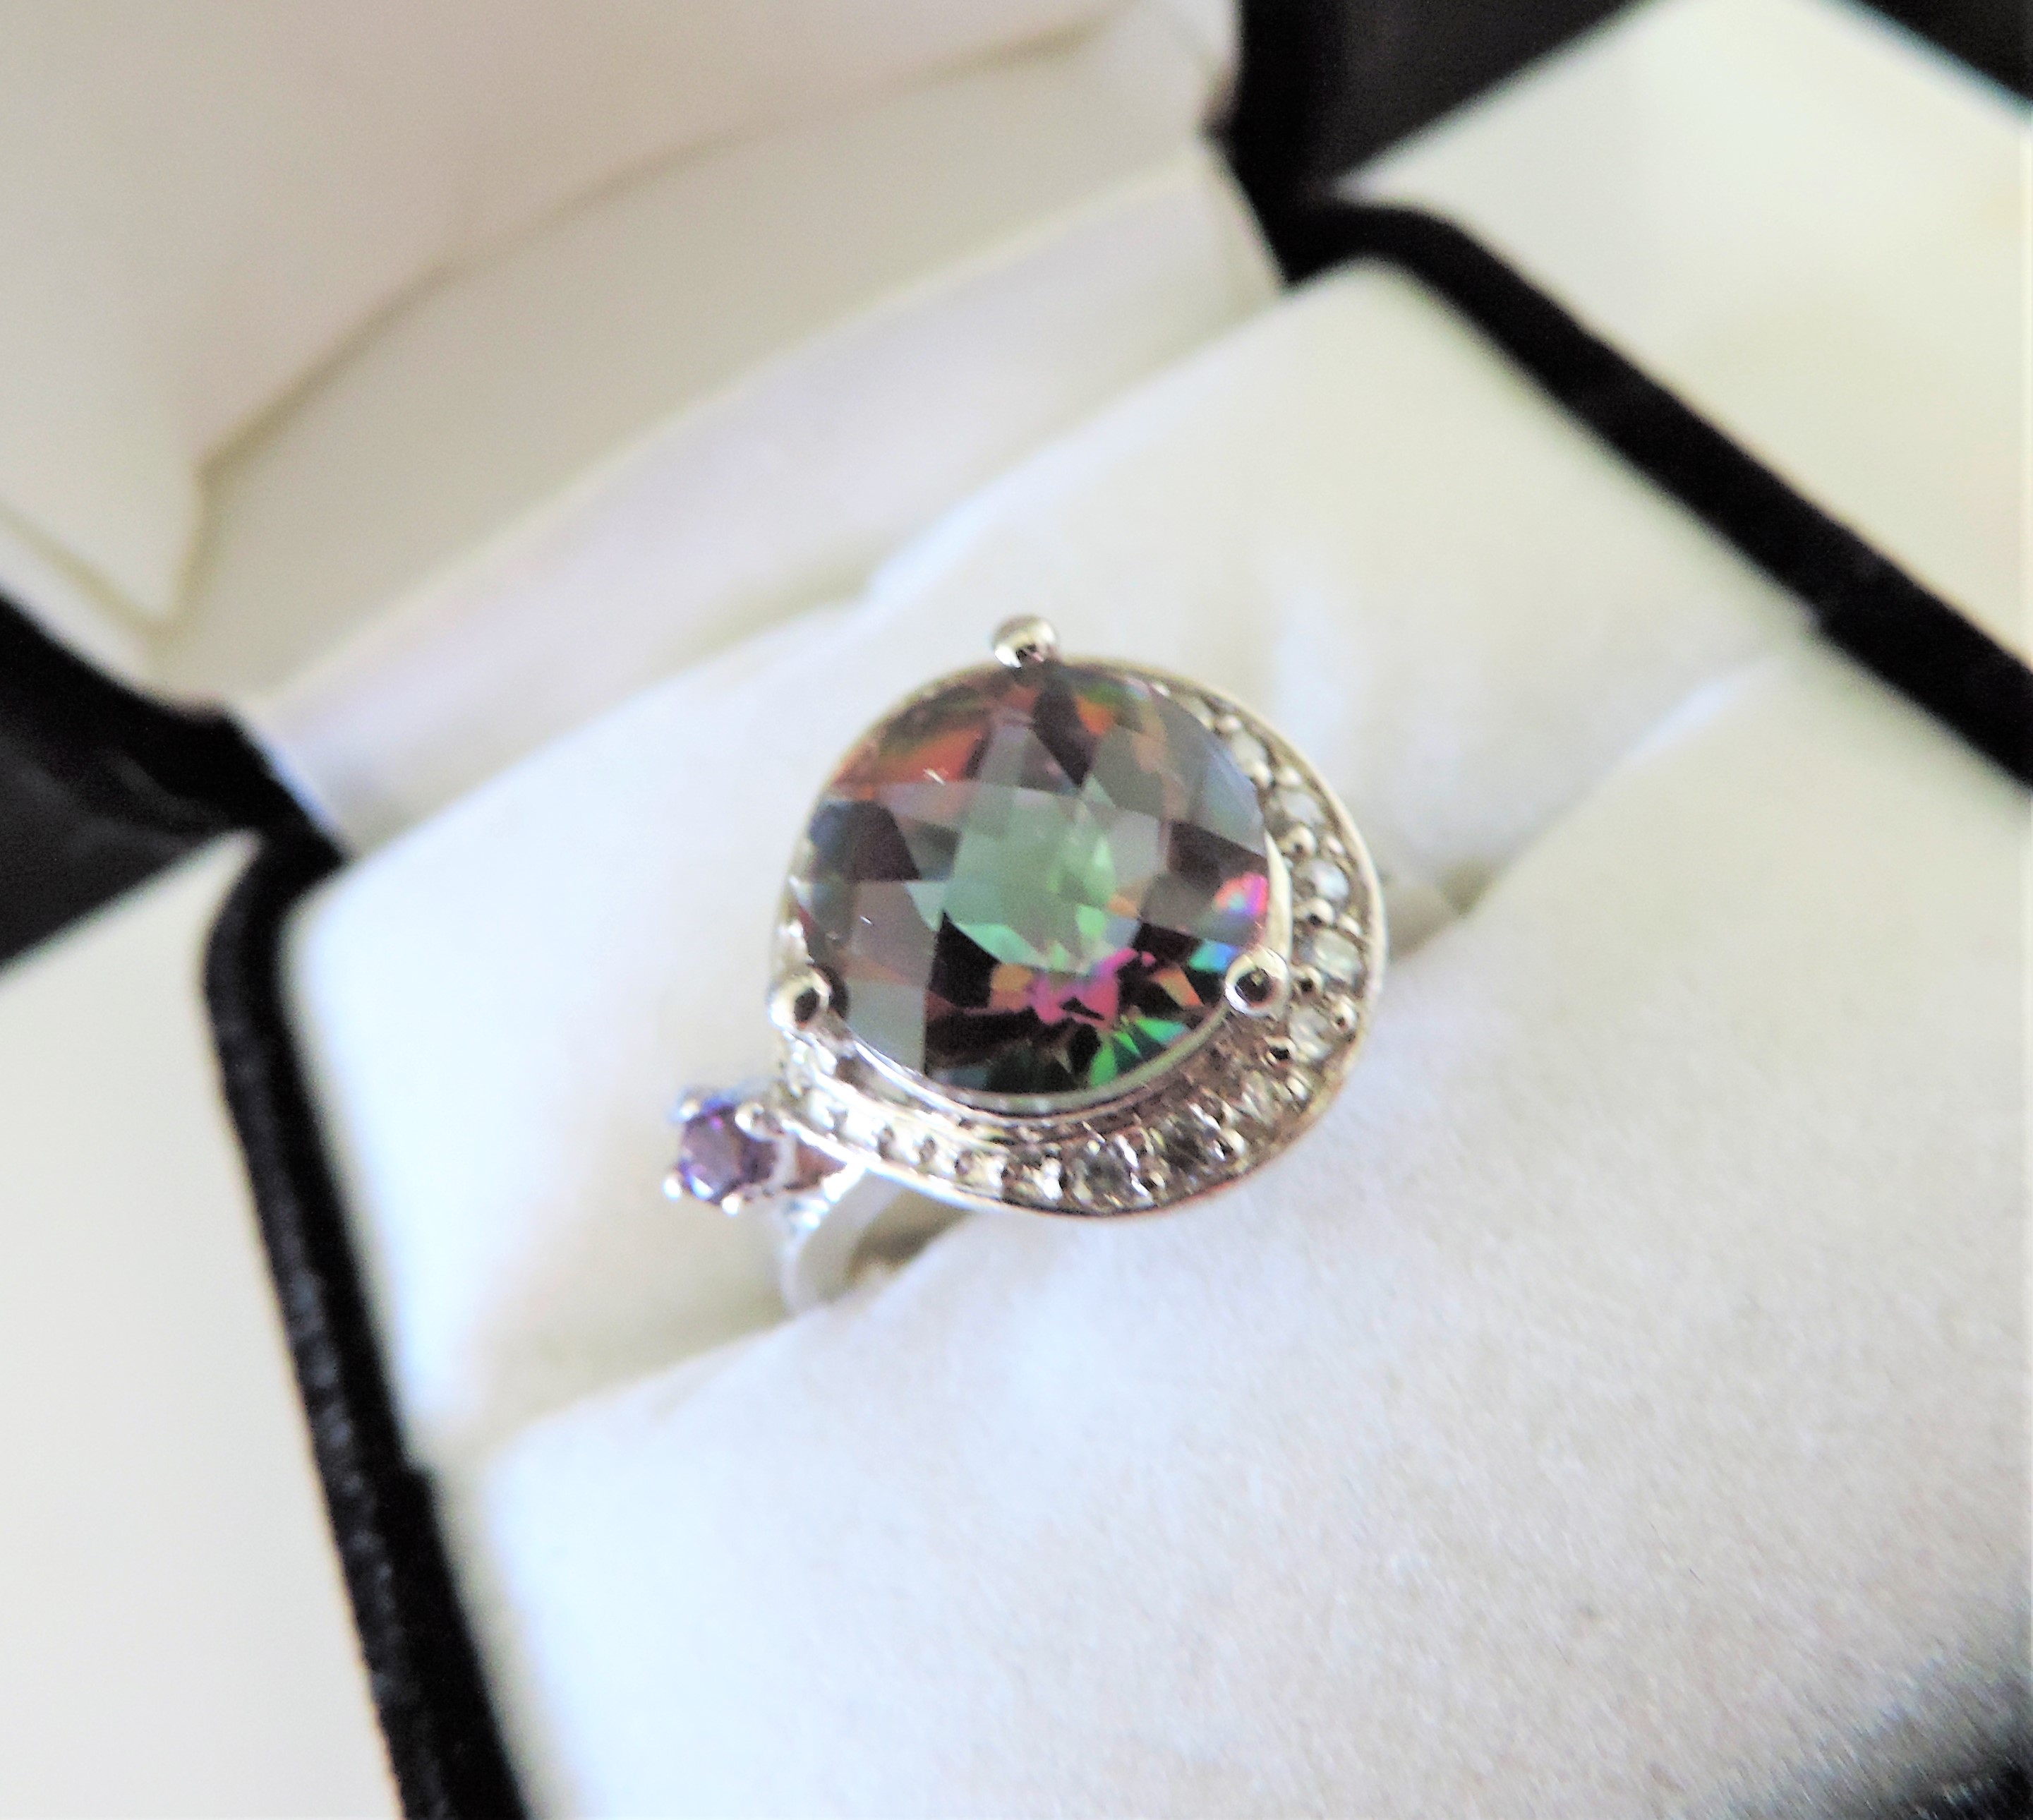 5.75ct Mystic Topaz Ring in Sterling Silver - Image 3 of 5